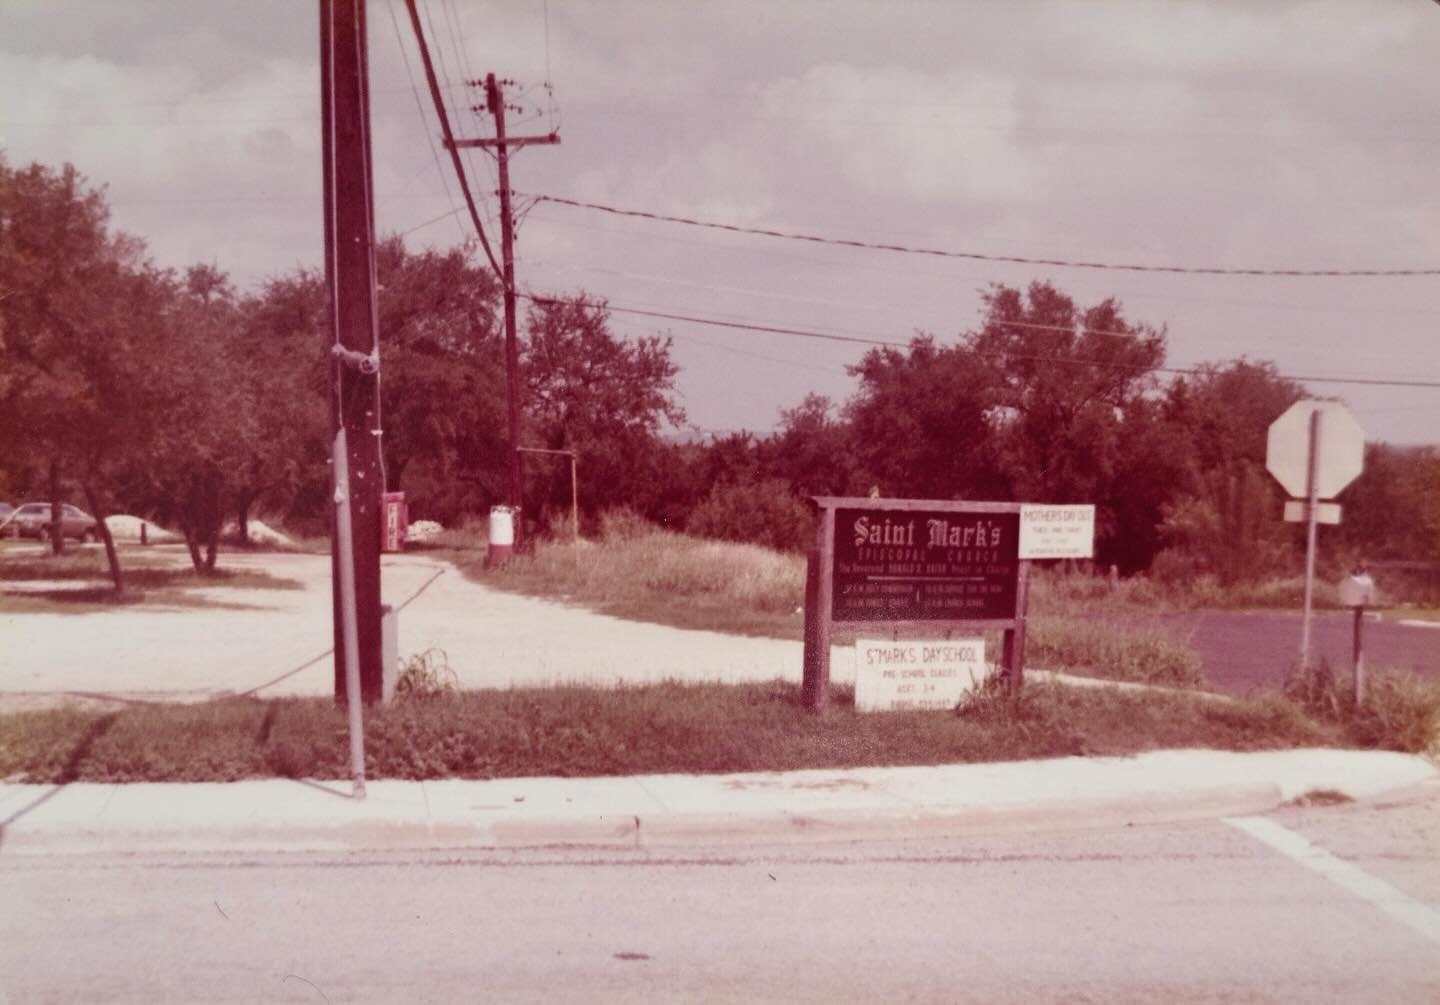 In 1959 the Episcopal Diocese of Texas bought eight acres on the outskirts of south Austin, way down by the Broken Spoke, to be a home for a newly planted church called St. Mark&rsquo;s. Recognize this four-way stop???